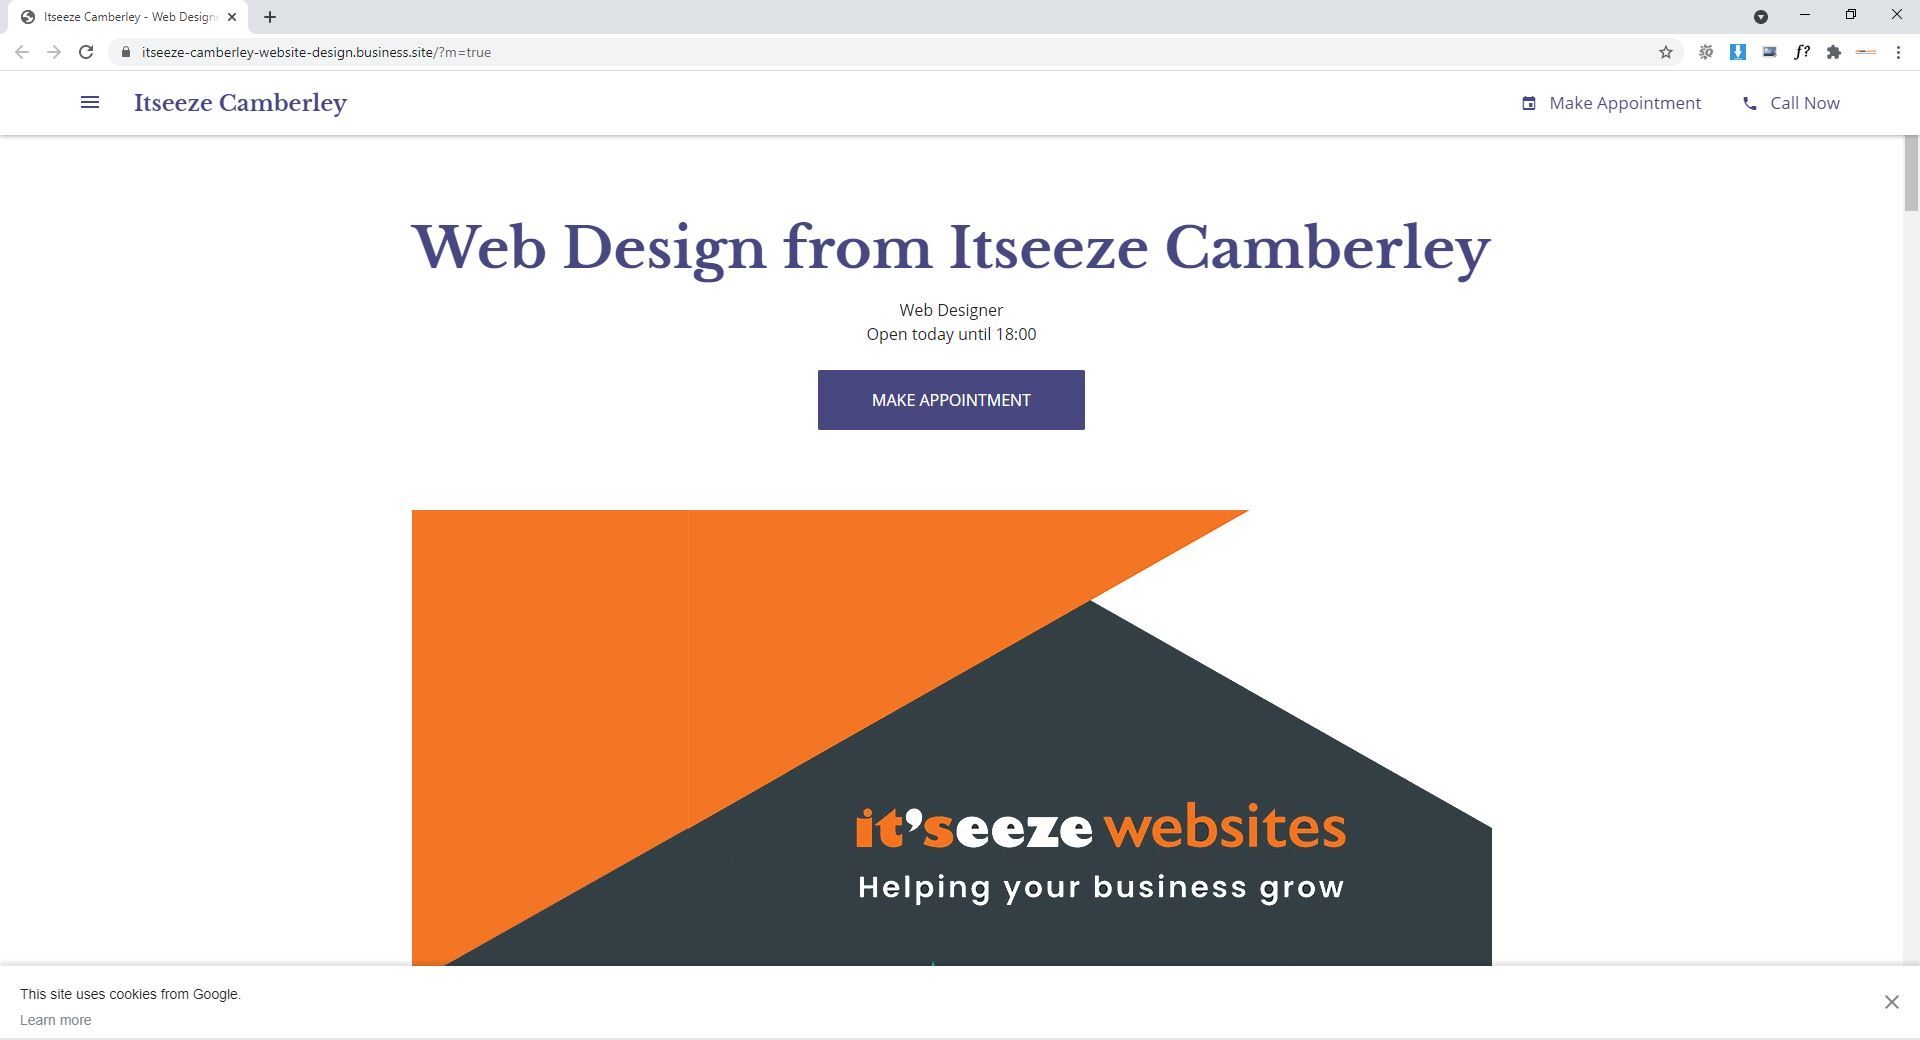 Web Design from Itseeze Camberley